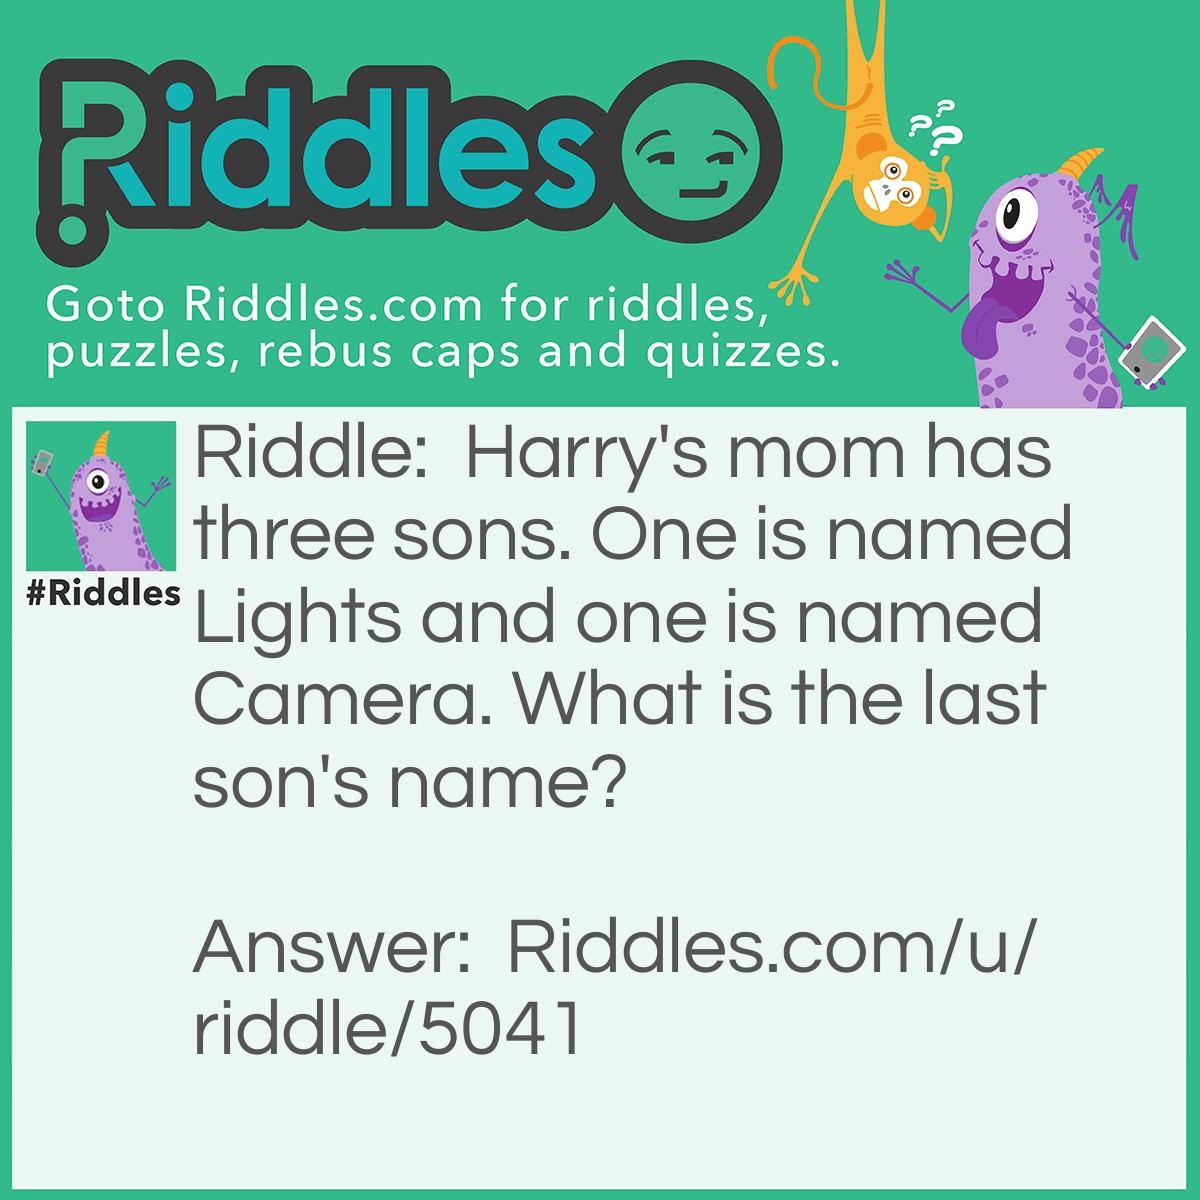 Riddle: Harry's mom has three sons. One is named Lights and one is named Camera. What is the last son's name? Answer: Harry